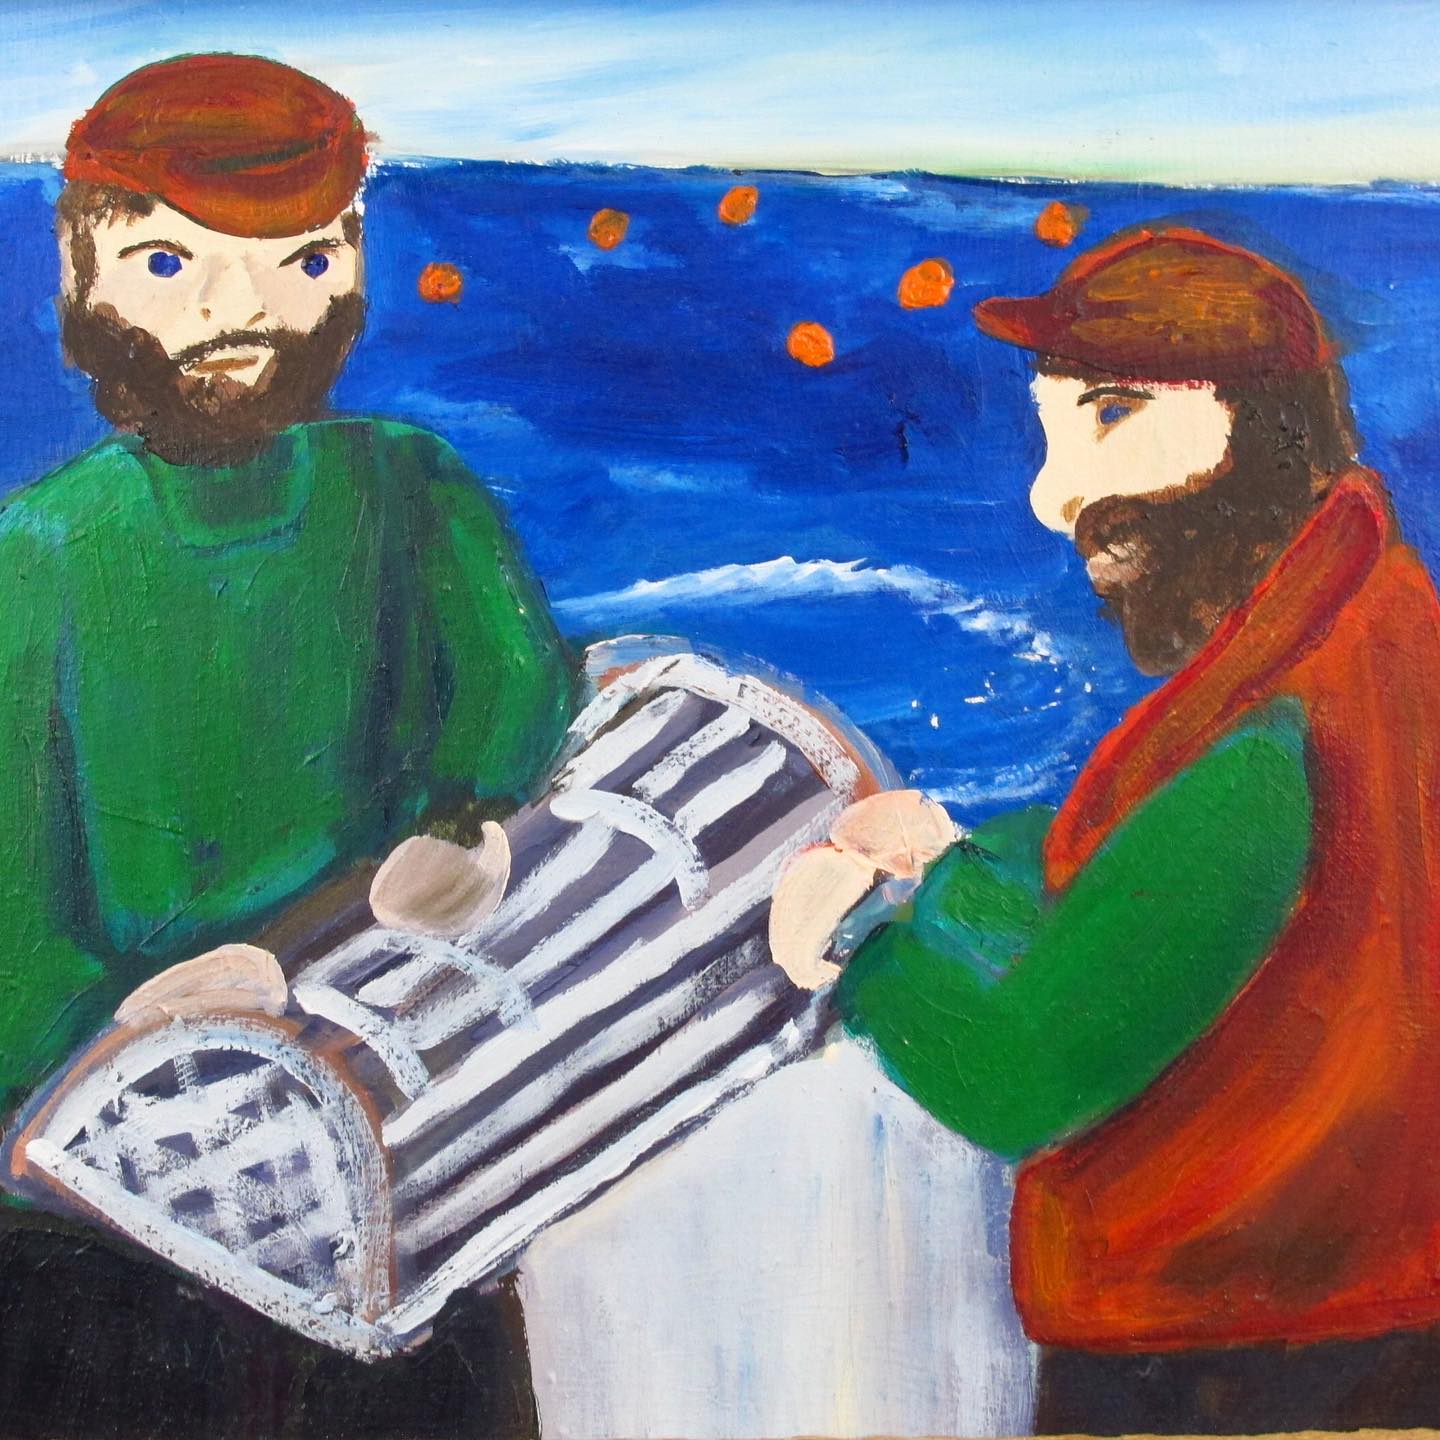 Mainaes Signed "these are my relatives lobstering" Folk Art Painting depicting Lobstermen, Ocean, Bouys, presented in artist-made frame